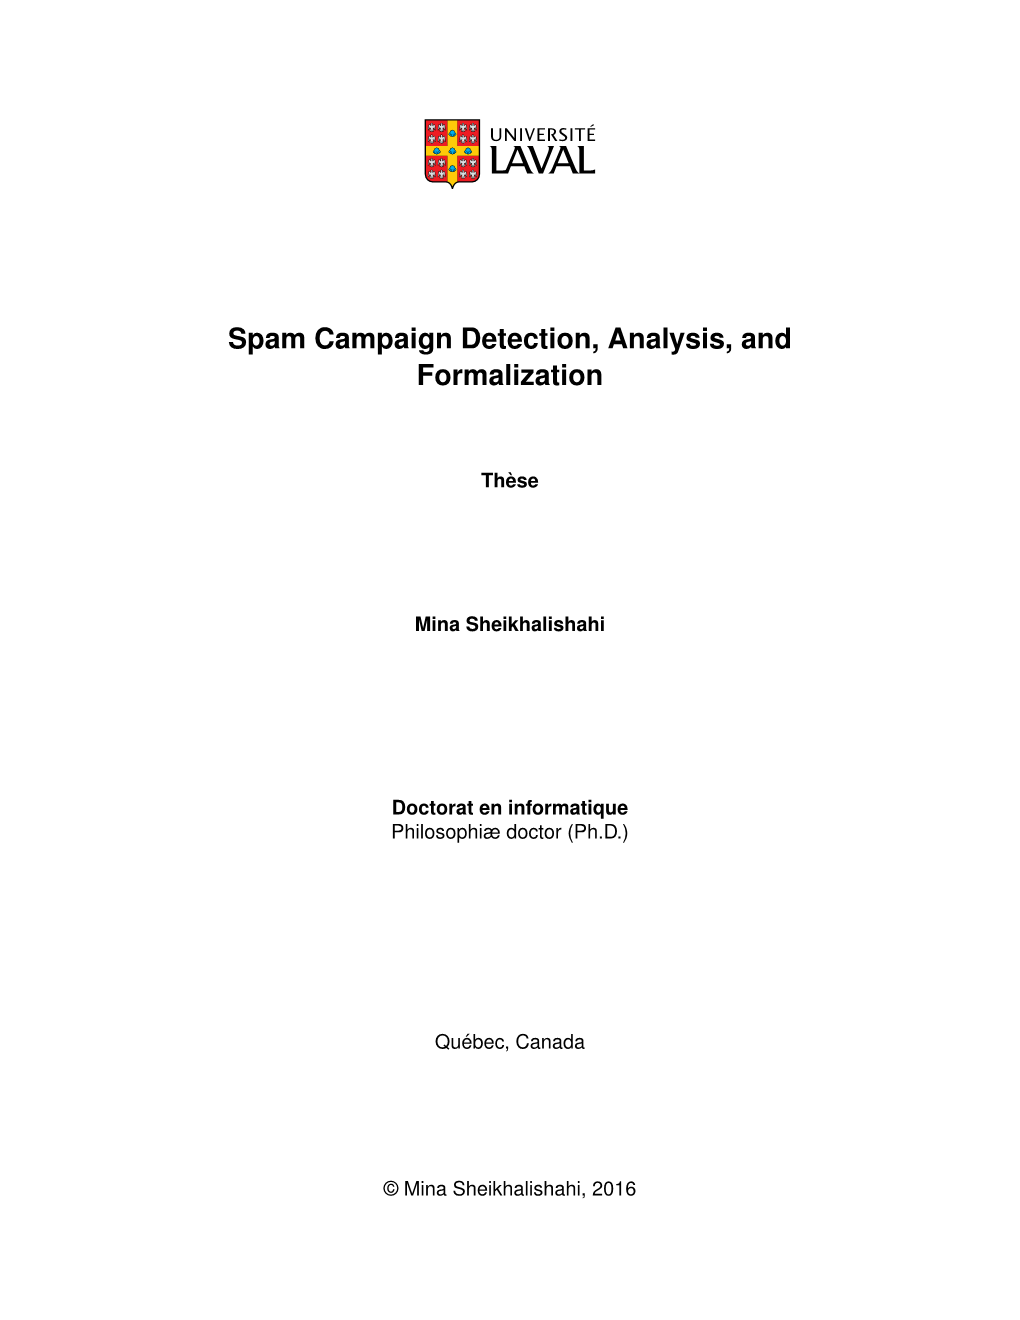 Spam Campaign Detection, Analysis, and Formalization